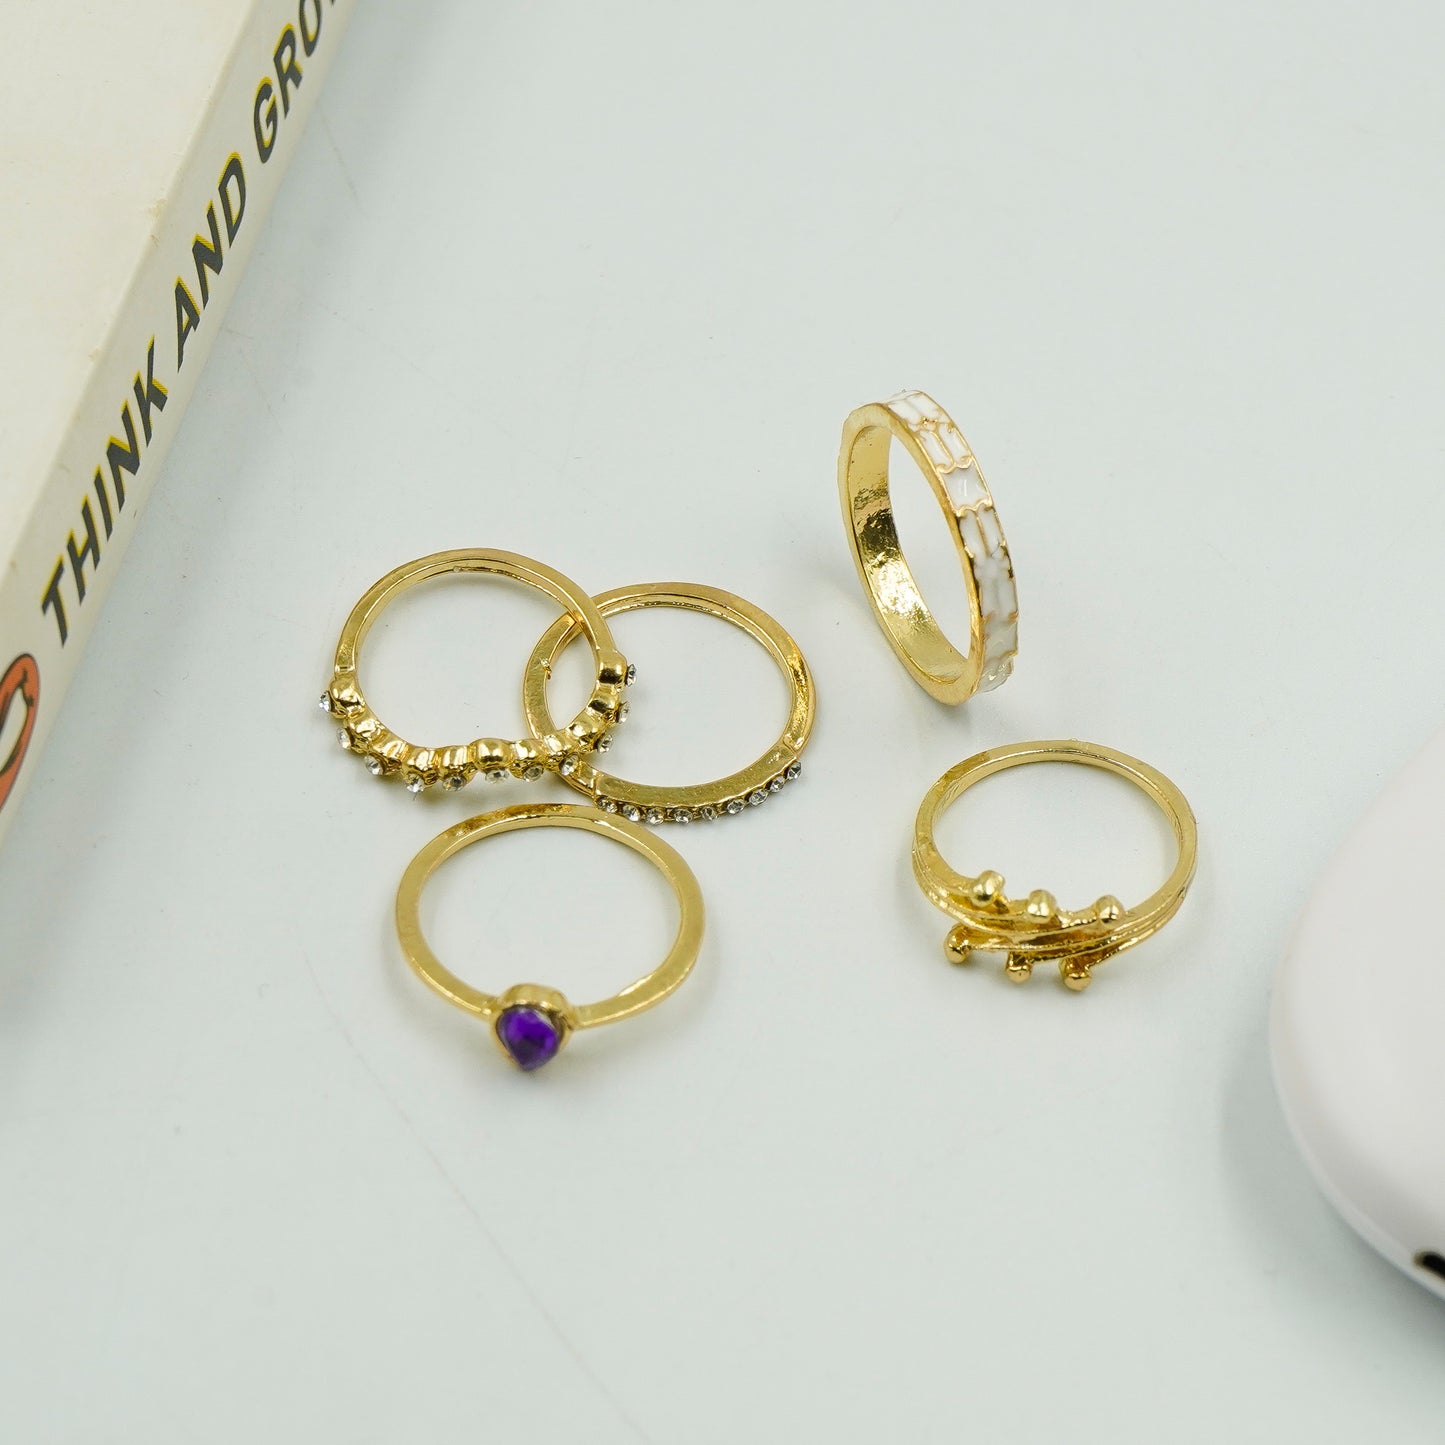 Trendy Set Ring For Fashionable Women(Code:R81)